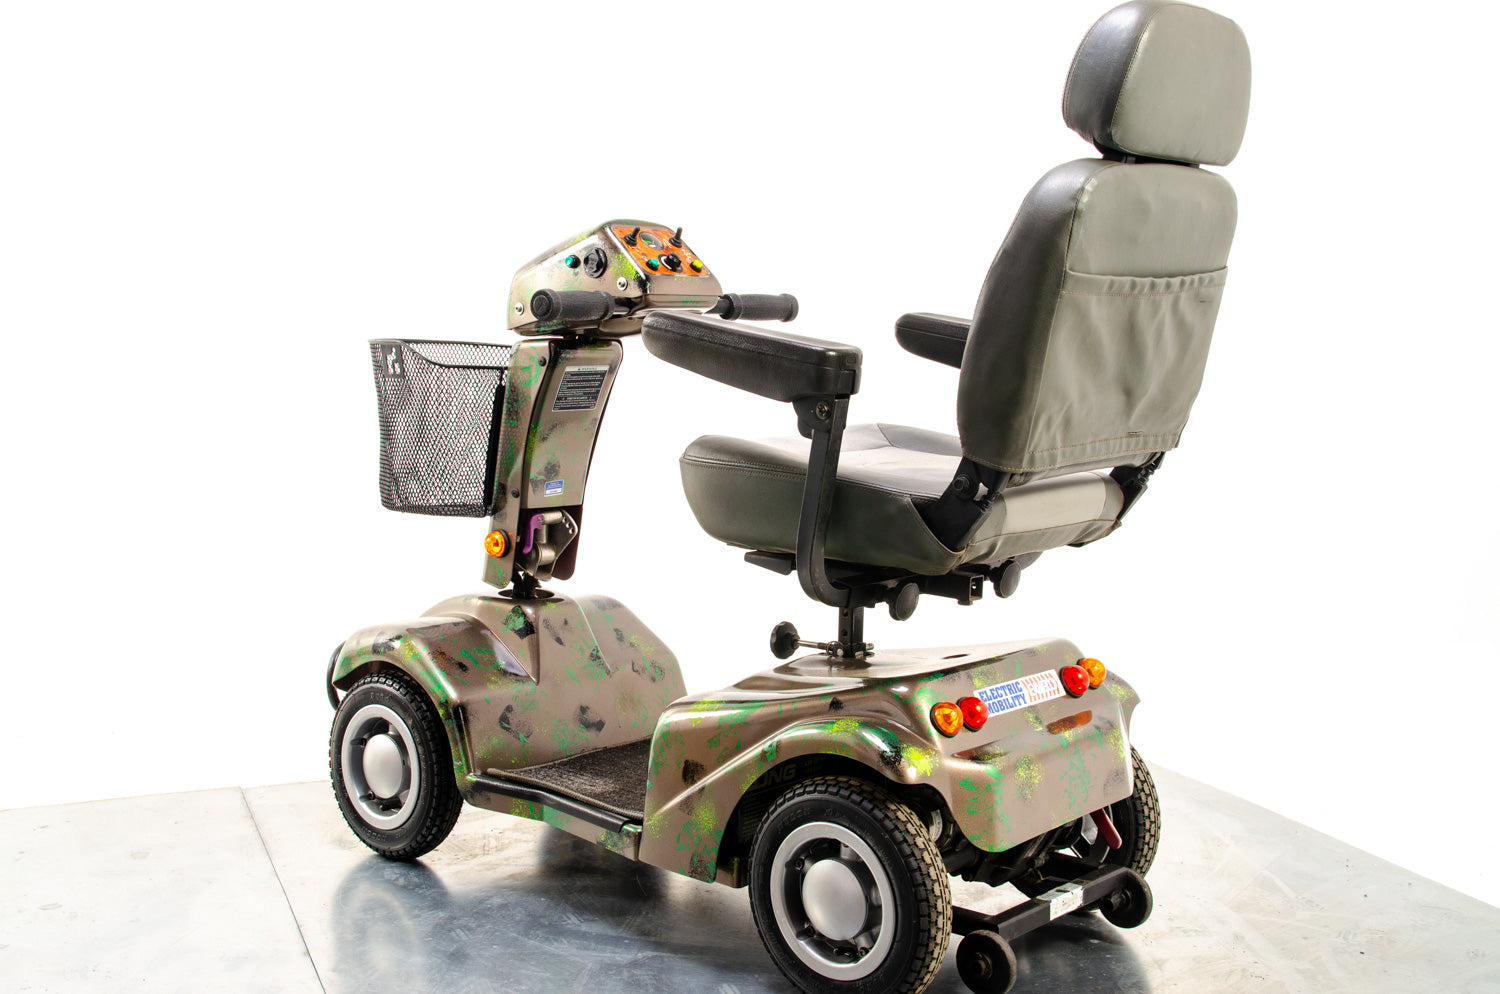 Rascal 388XL All-Terrain Used Electric Mobility Scooter 6mph Road Pavement Suspension Custom Camo